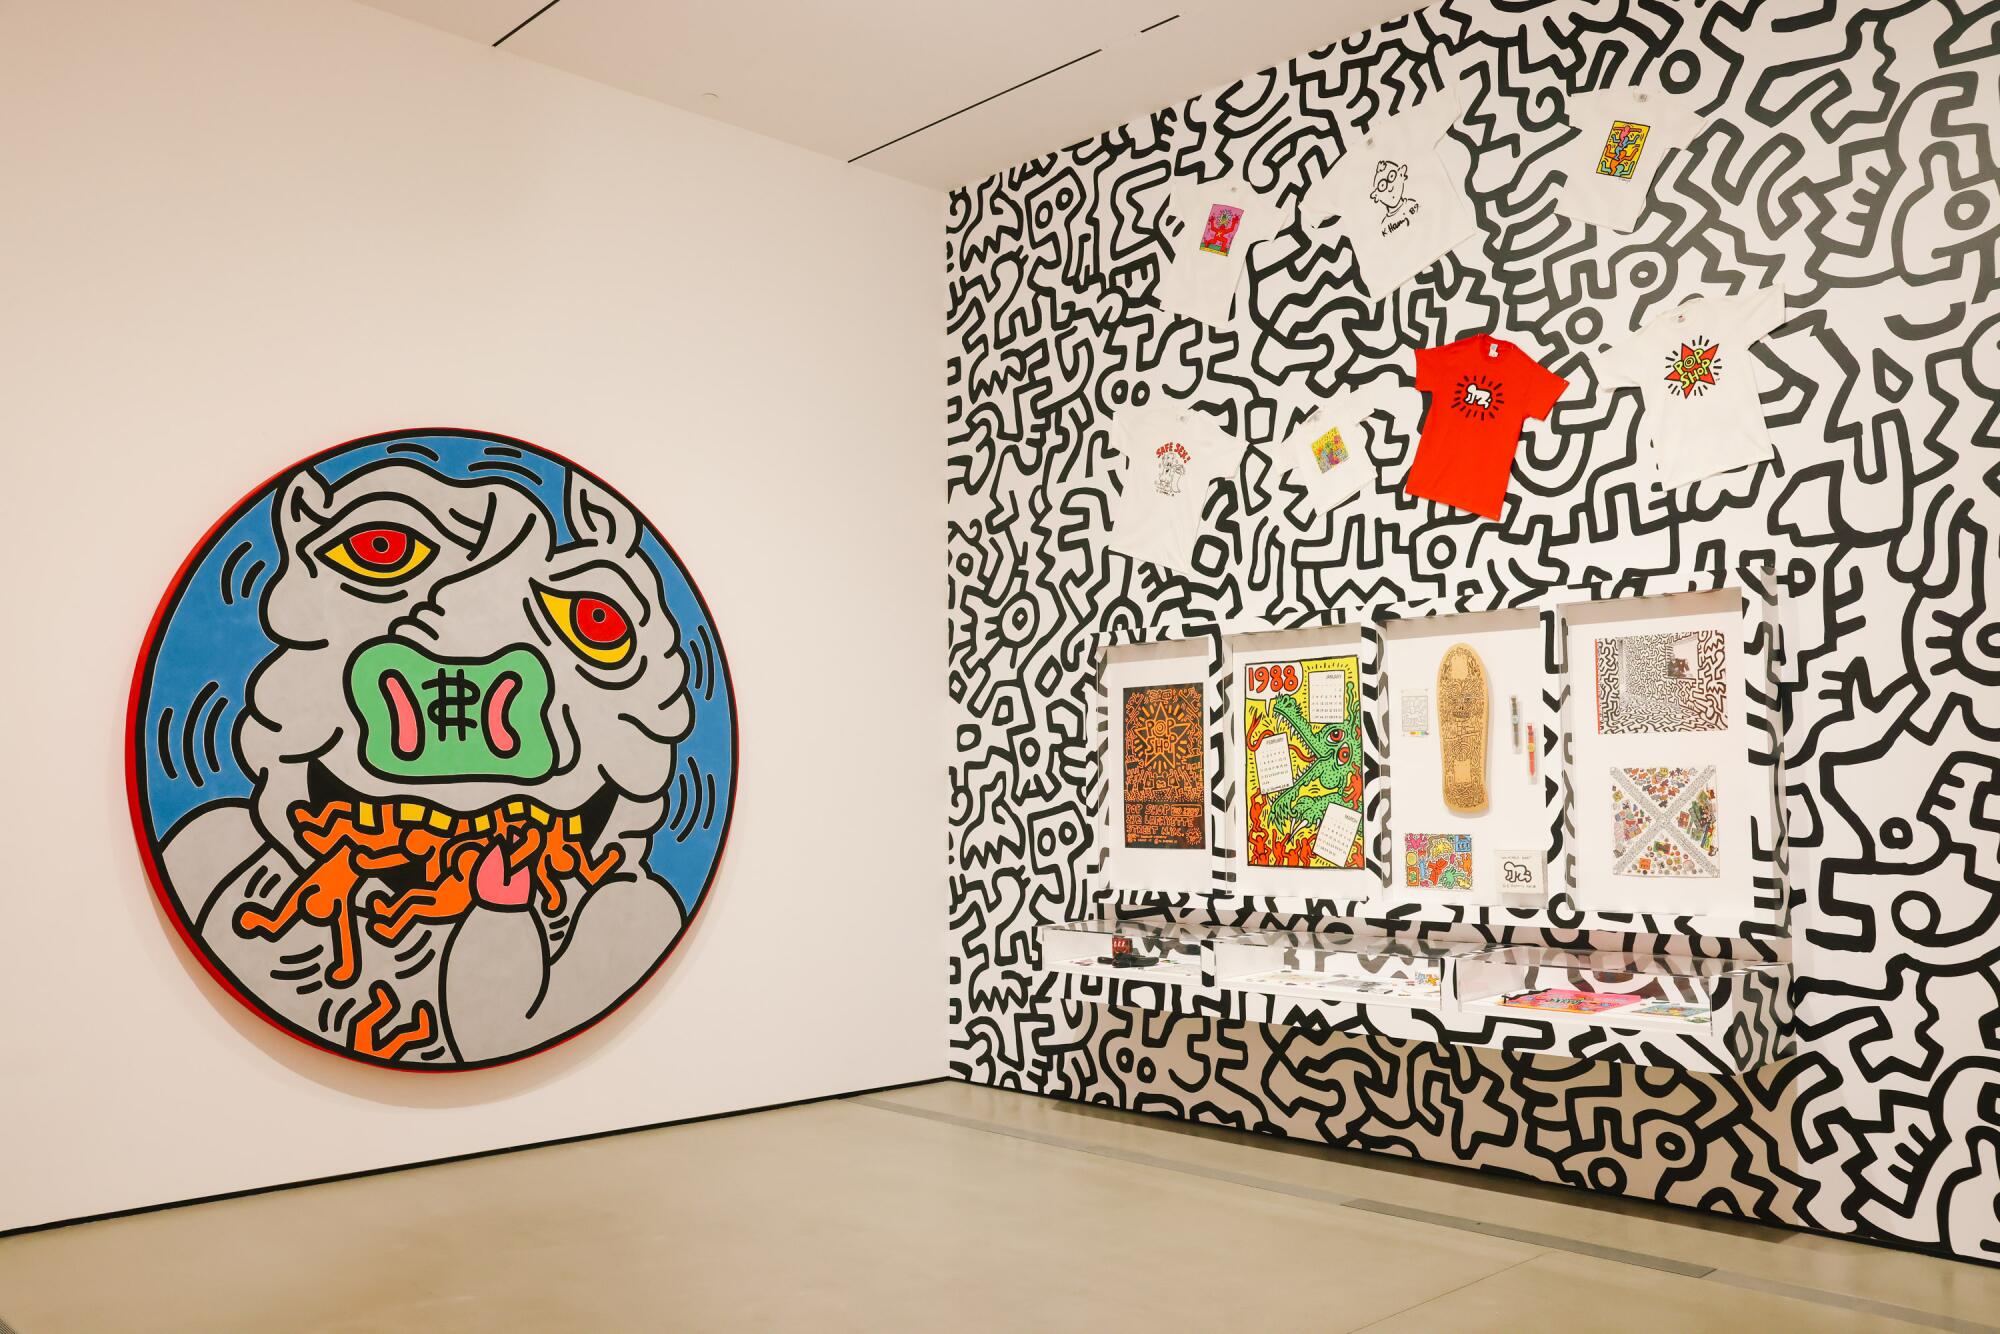 Public Enemy's Chuck D Set For Keith Haring Conversation At The Broad